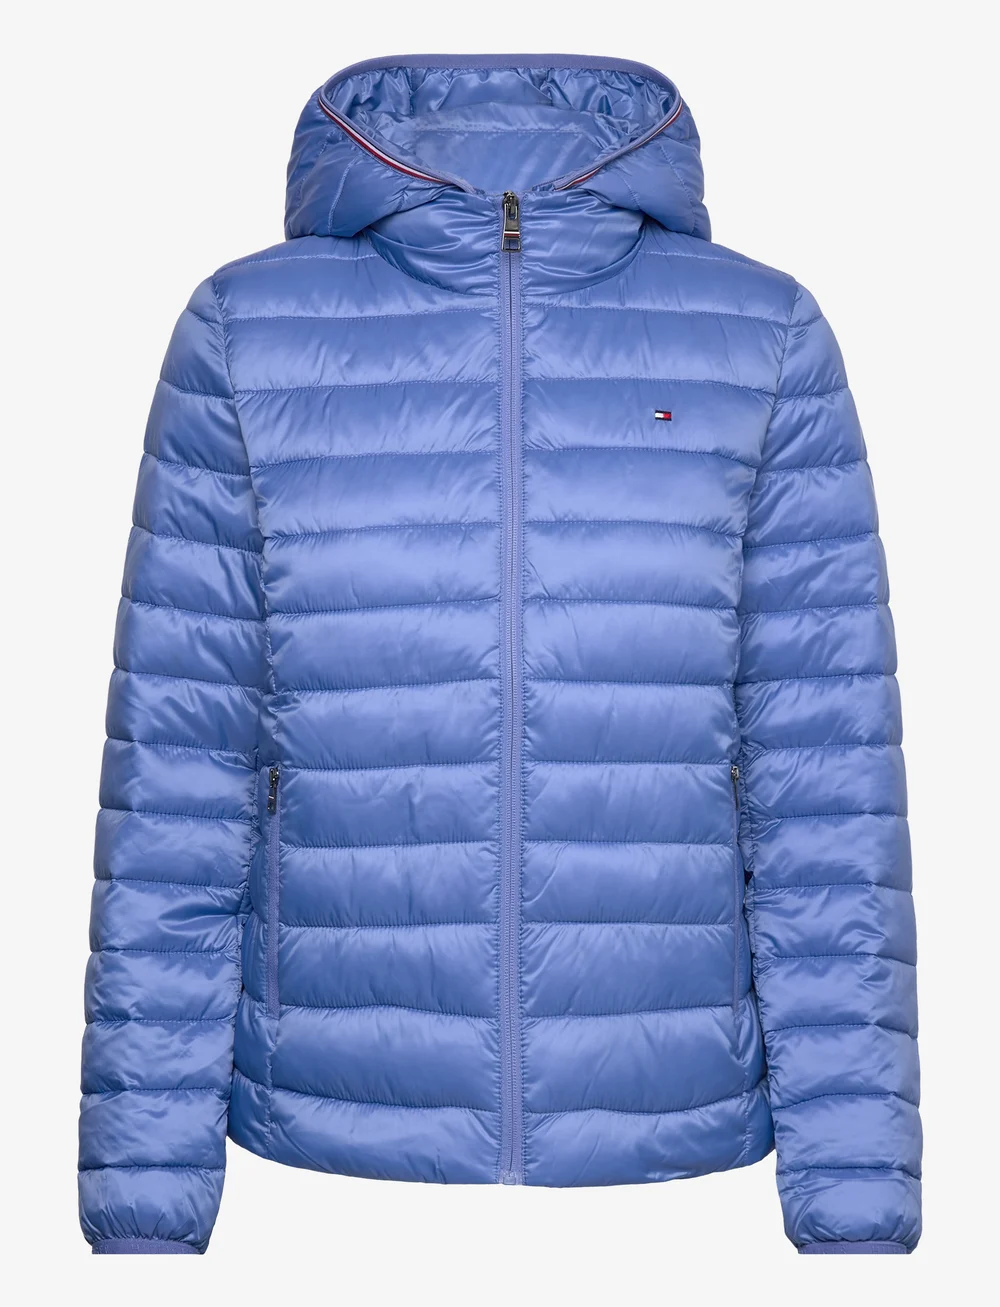 Tommy Hilfiger Lw Padded Global Stripe Jacket - 99.95 €. Buy Down- & padded  jackets from Tommy Hilfiger online at Boozt.com. Fast delivery and easy  returns